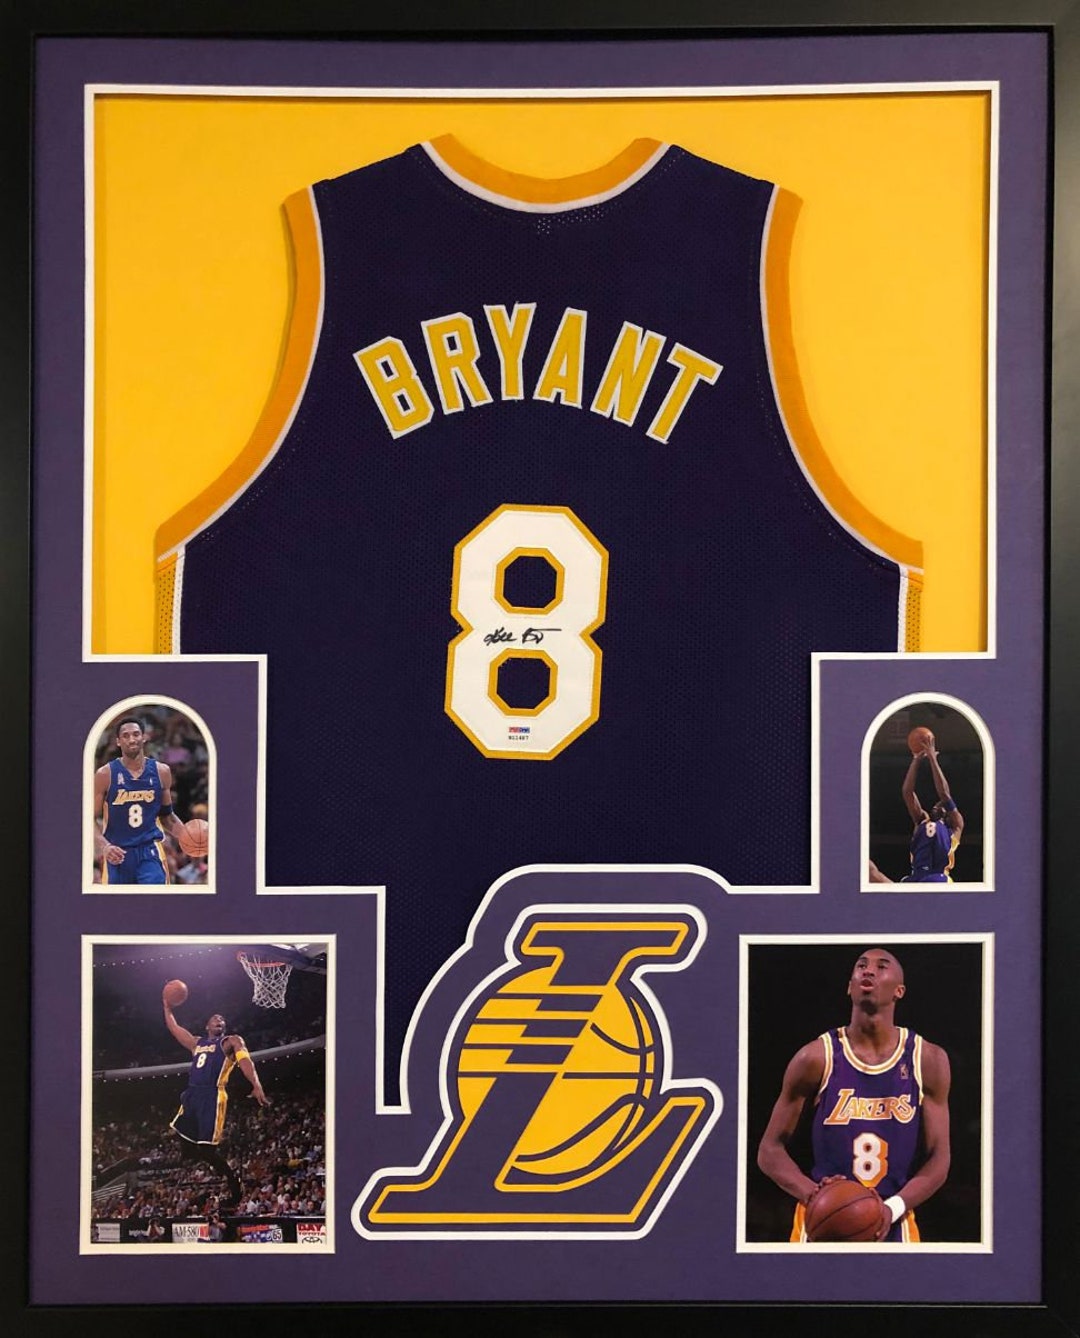 Kobe Bryant "Mamba Out" Signed #24 Authentic Los Angeles